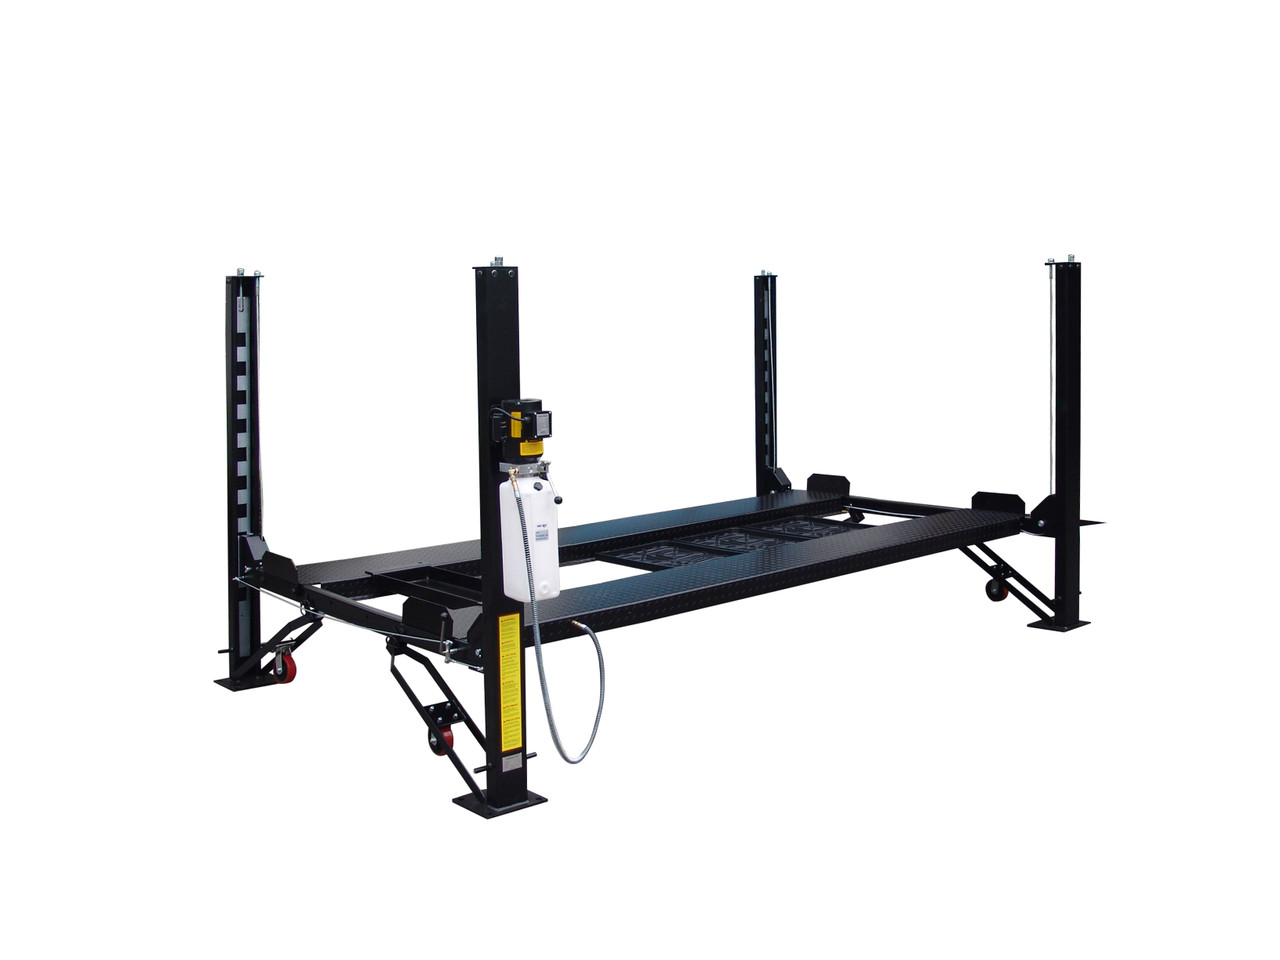 Tux FP8K-DX BASIC STORAGE 8K LB 4 POST PARKING LIFT INCLUDES POLY CASTERS, DRIP TRAYS,  JACK TRAY